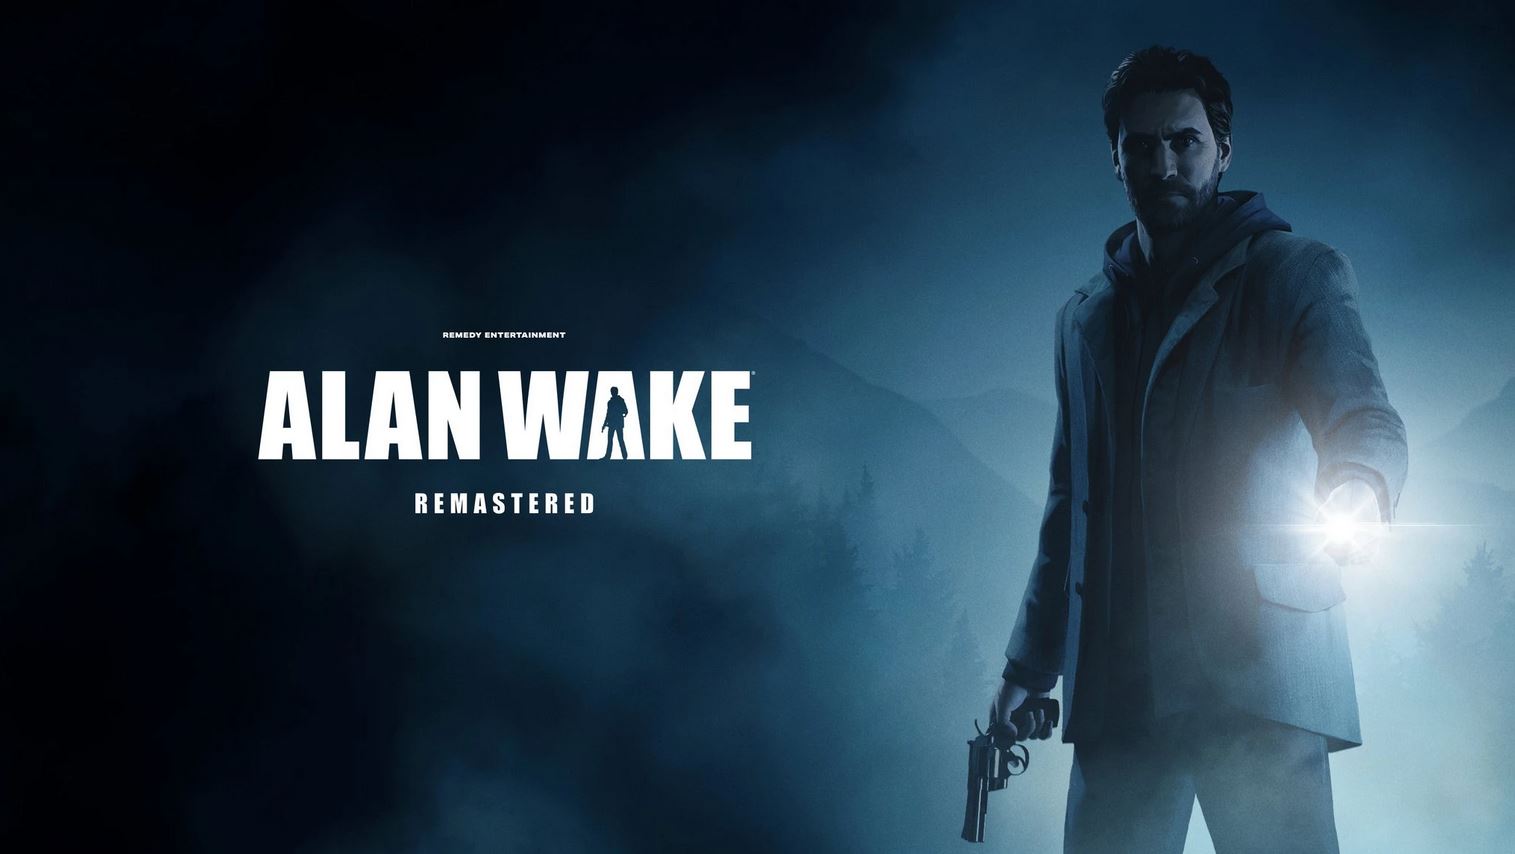 Alan Wake 2 - Official Behind-The-Scenes 'Fighting the Darkness